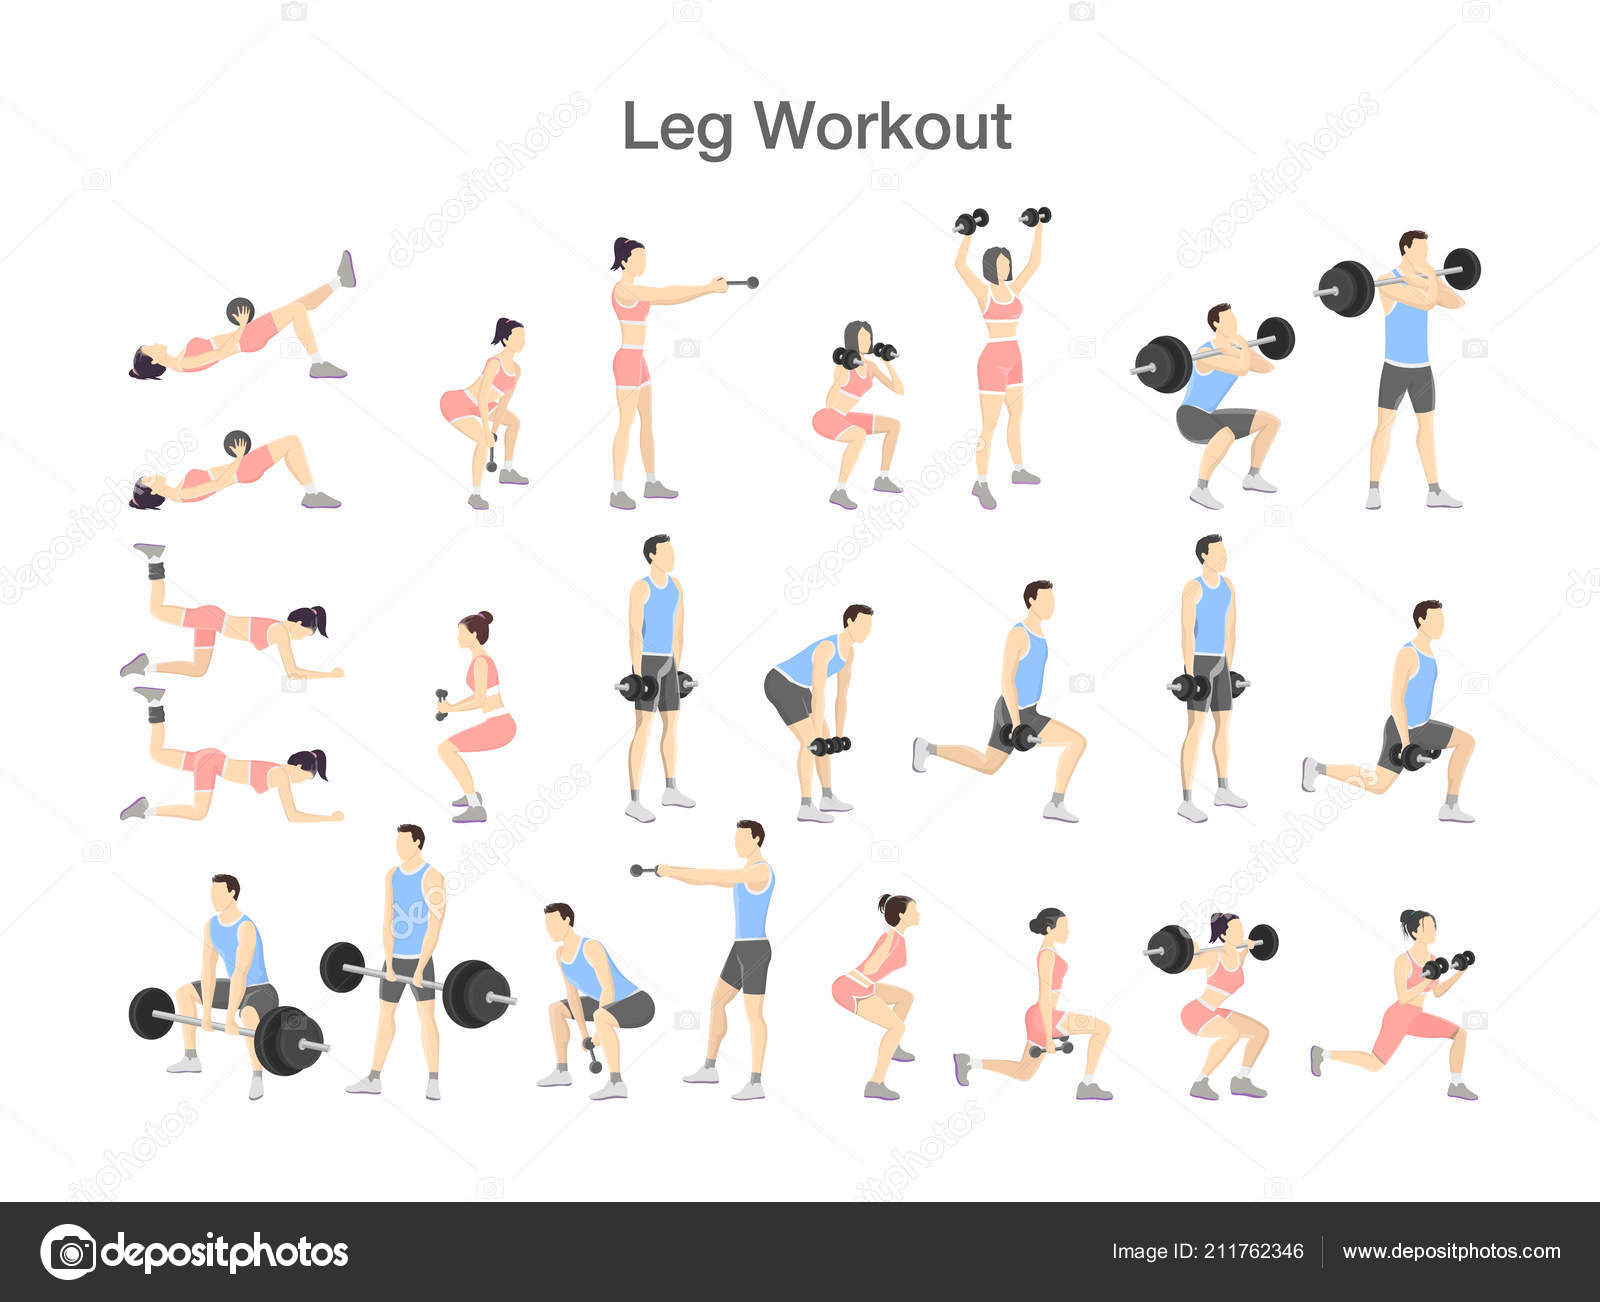 5 Day Leg Workout At Home With Dumbbells And Barbell for Build Muscle